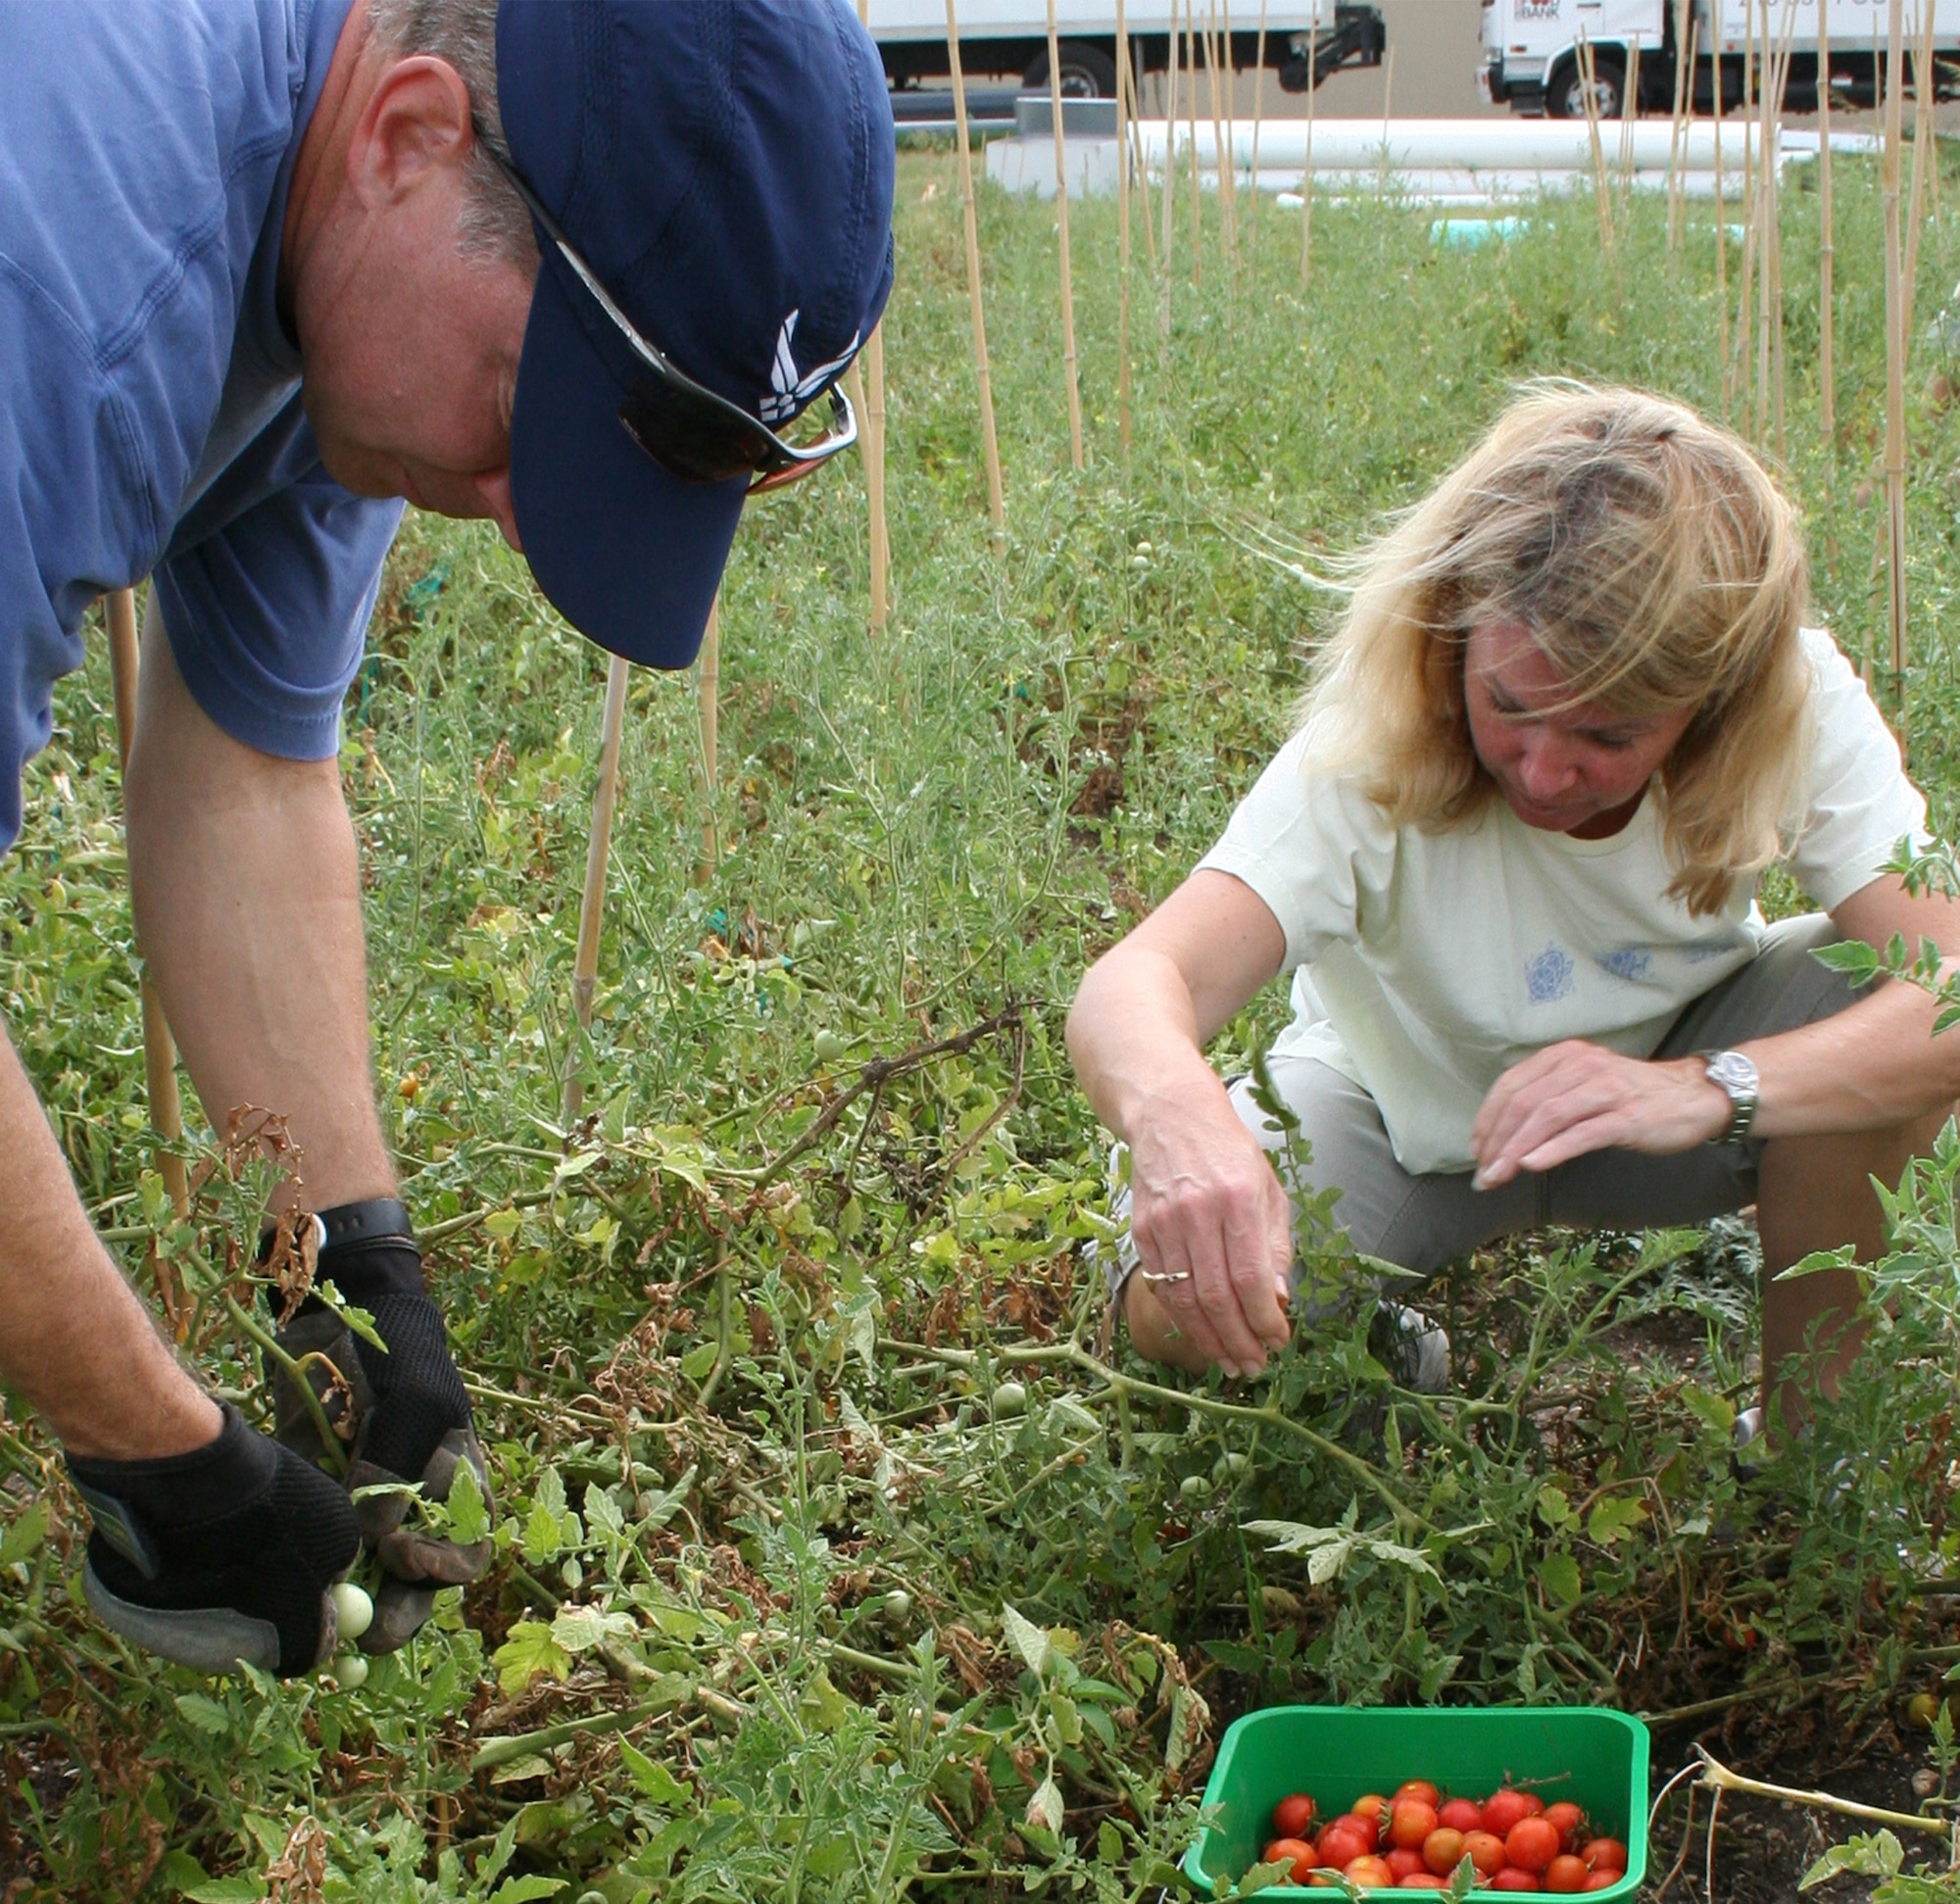 Air Force Personnel Center assignments director Col. David Slade and his wife Suzy help harvest tomatoes July 1, 2011, at the San Antonio Food Bank. (U.S. Air Force photo/Debbie Gildea)